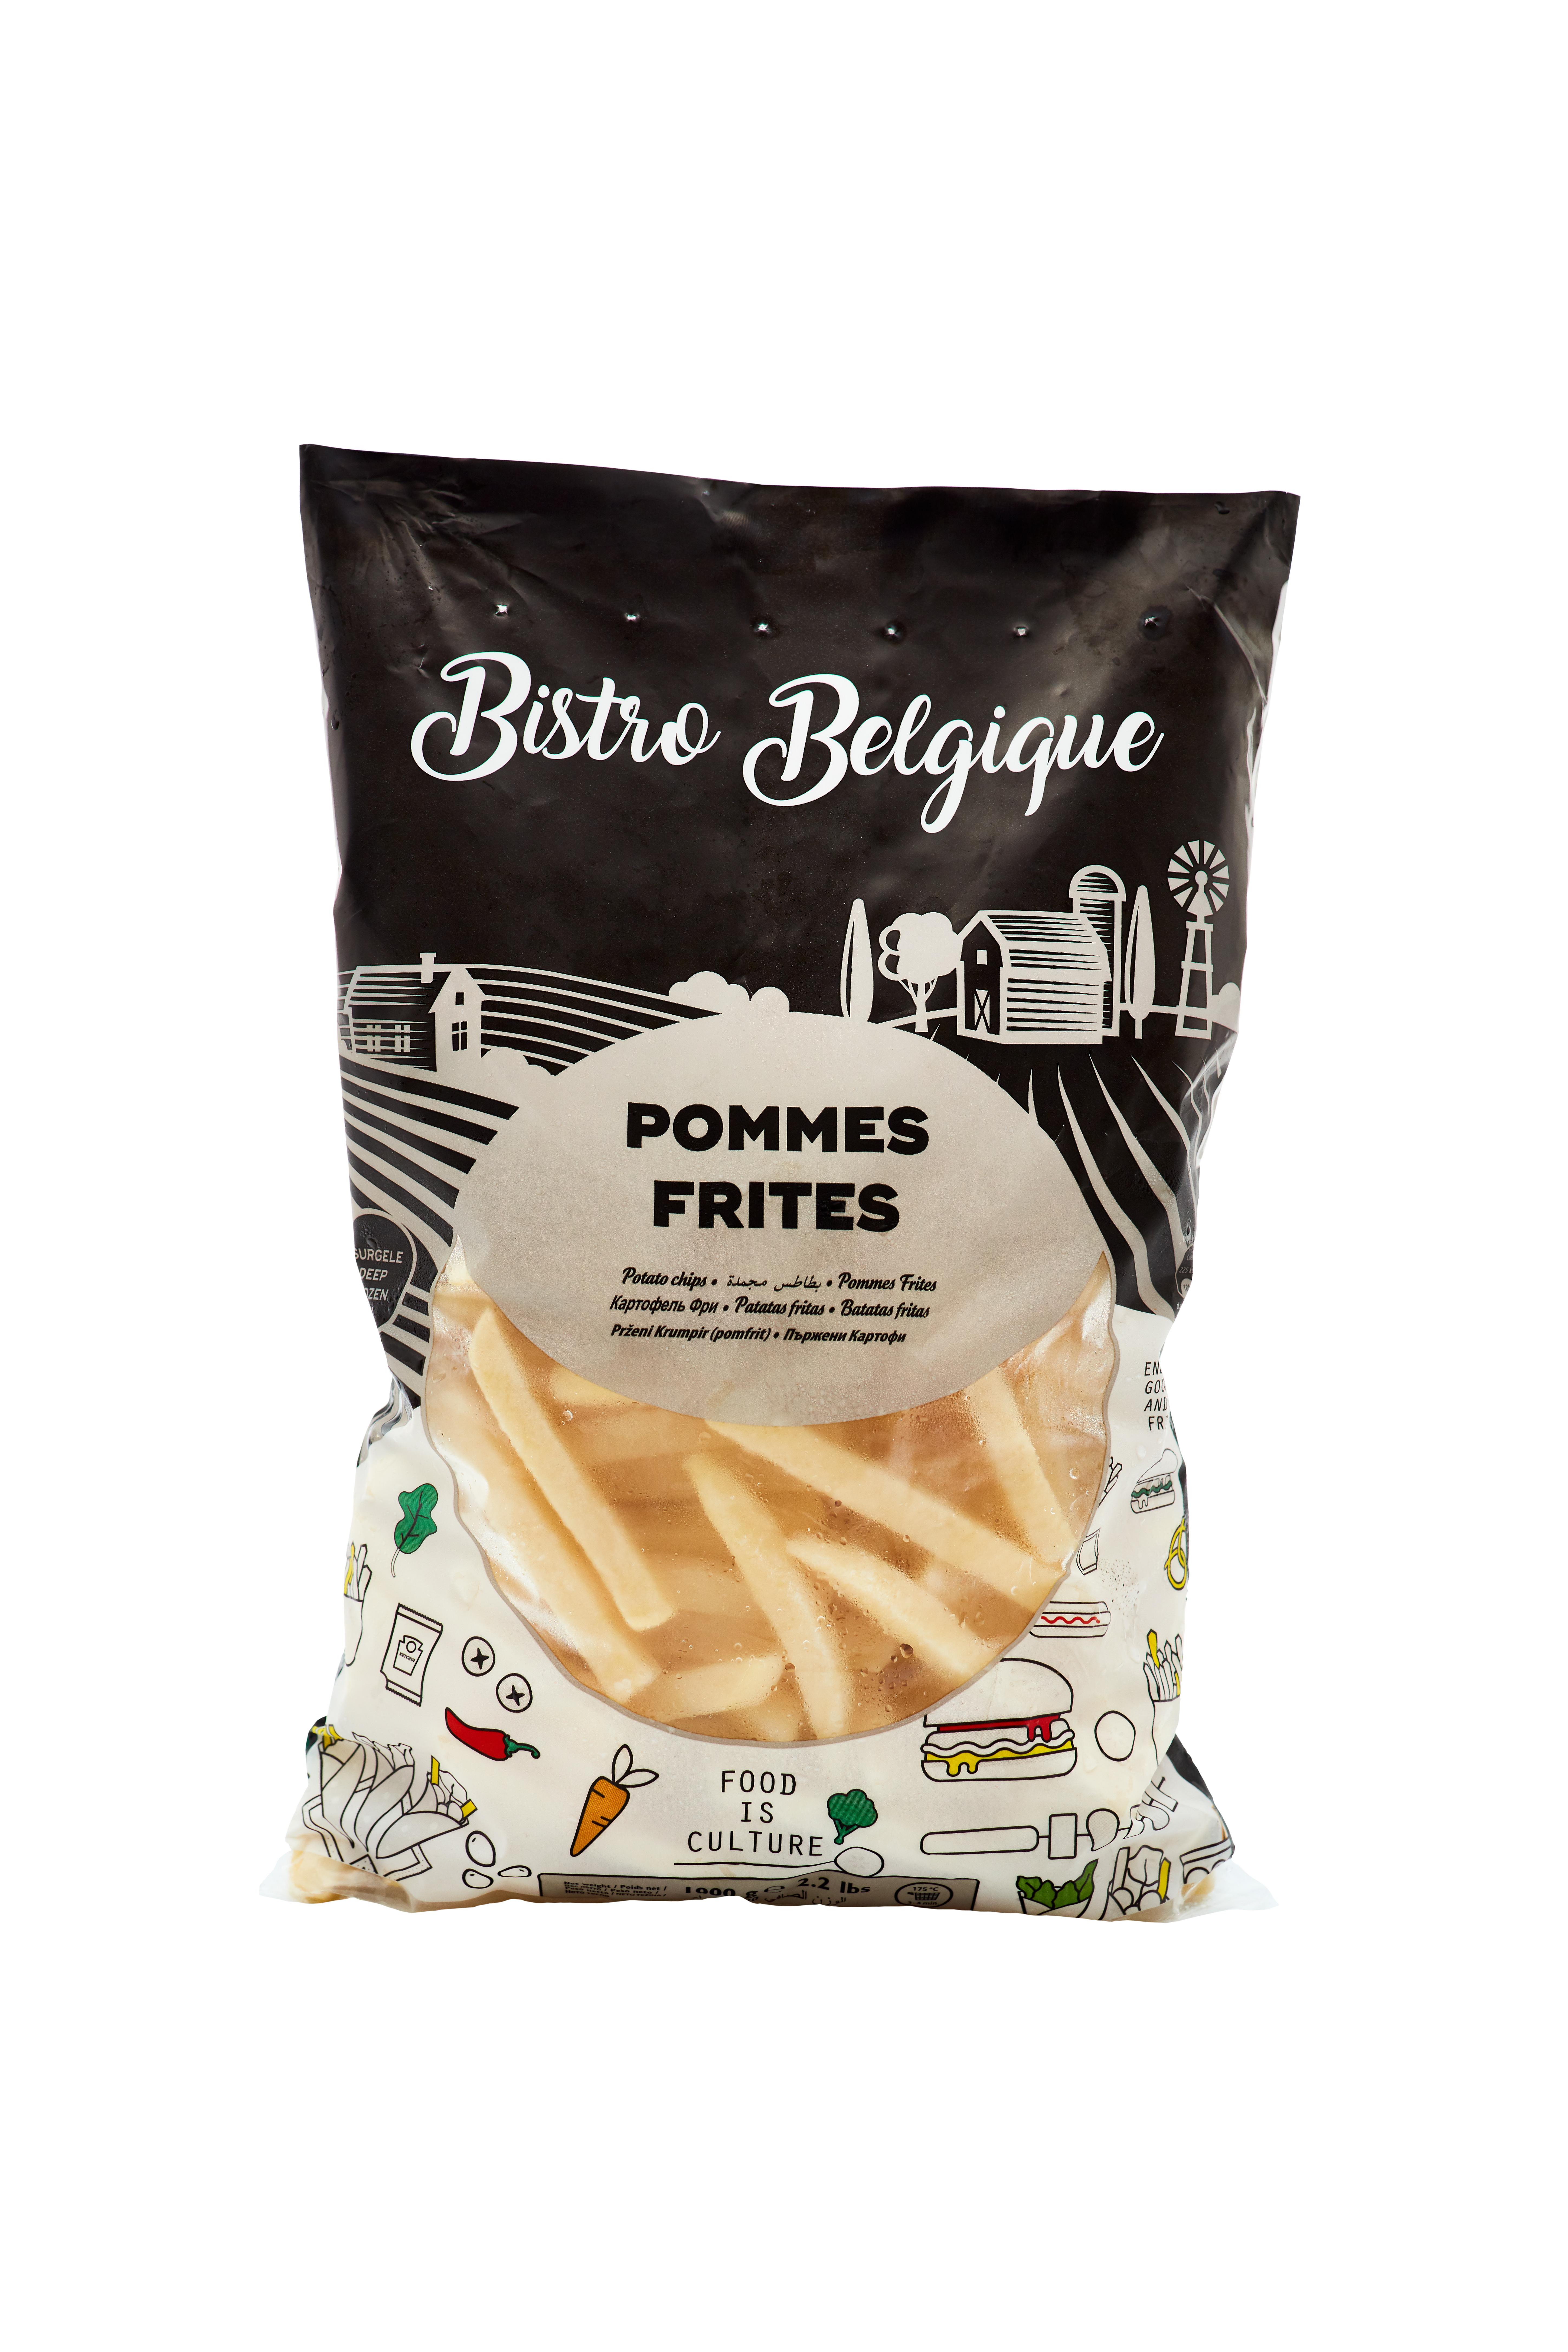 French fries 12x12mm Bistro Belgique brand packing